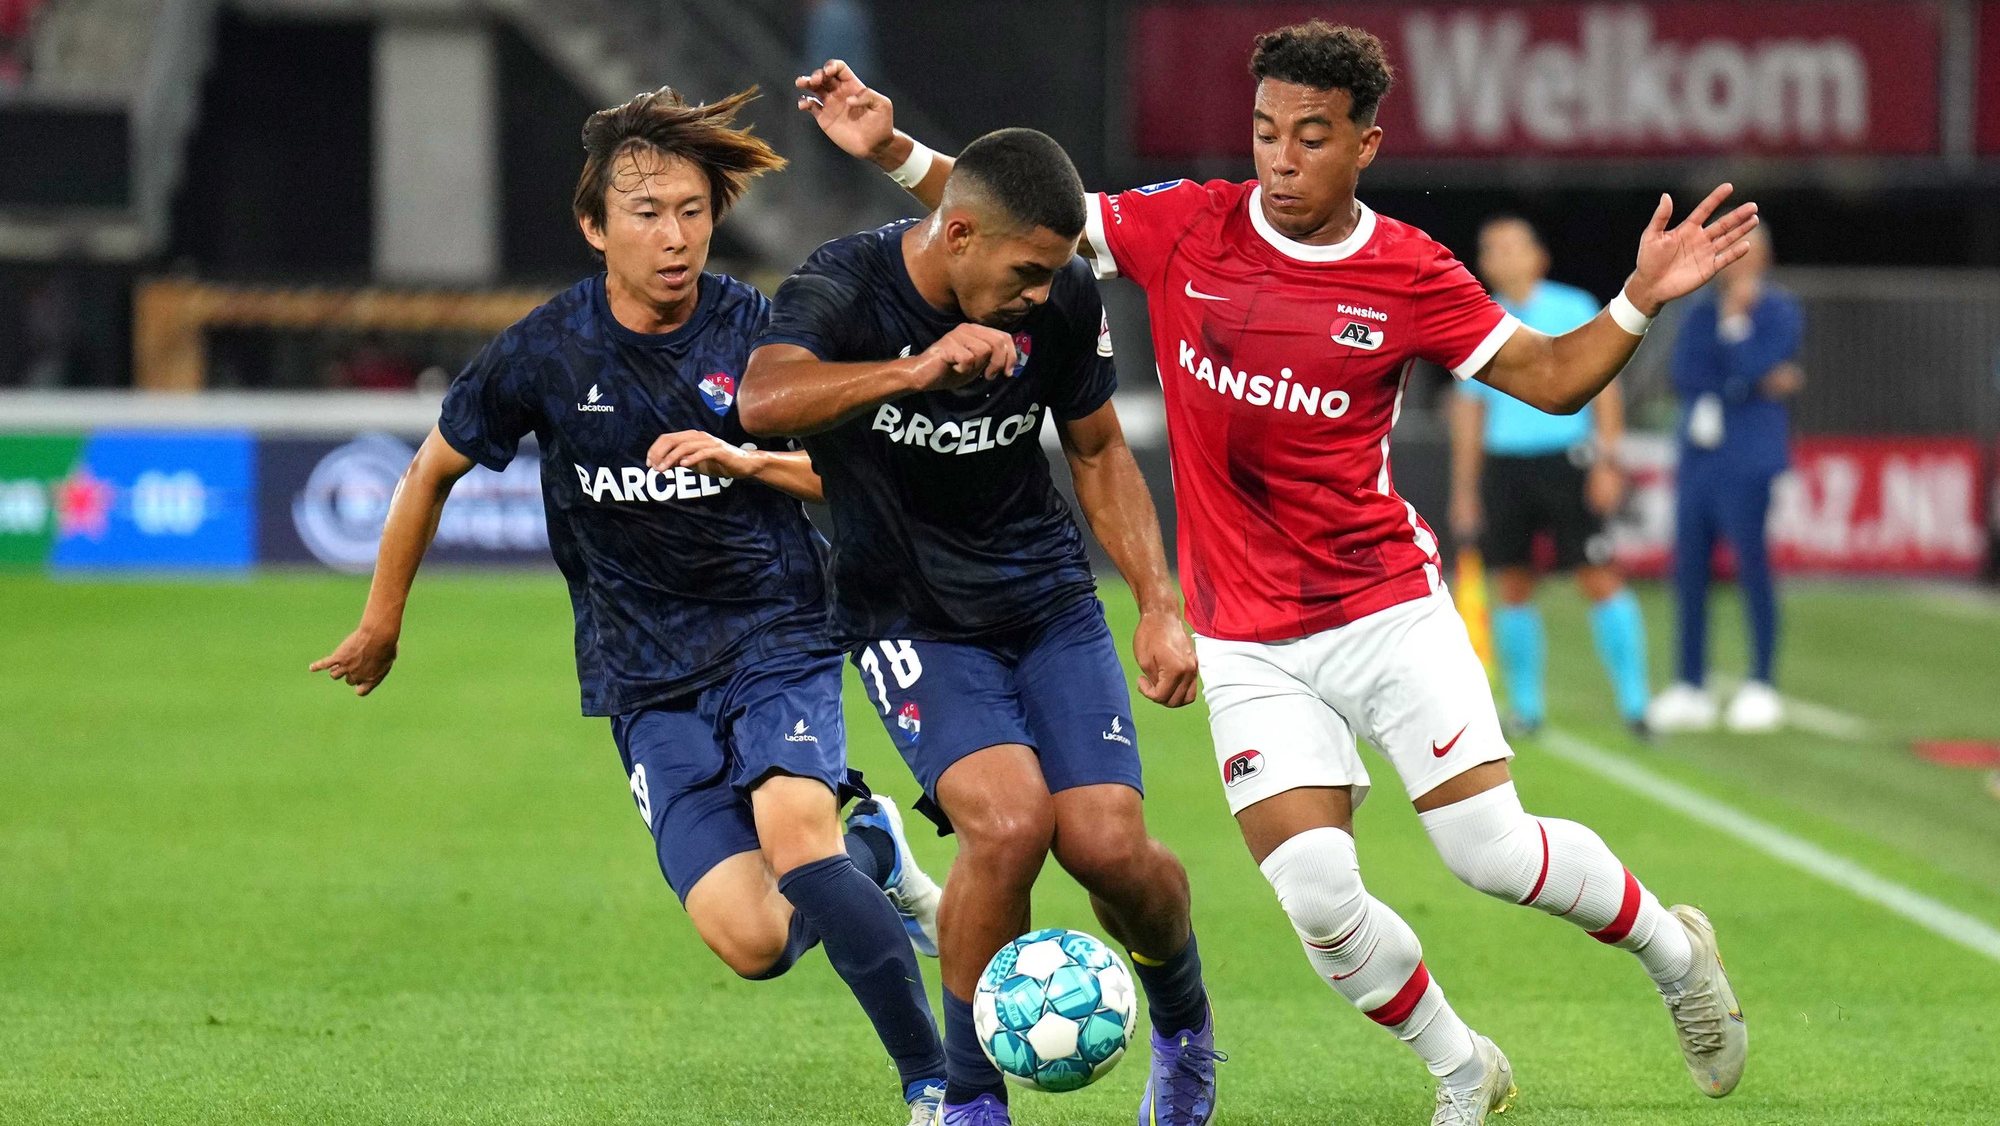 epa10128149 (L-R) Kanya Fujimoto of Gil Vicente FC, Myron van Brederode of AZ, Danilo Veiga or Gil Vicente FC during the UEFA Conference League play-off match between AZ Alkmaar and Gil Vicente FC at the AFAS stadium in Alkmaar, The Netherlands, 18 August 2022.  EPA/Ed van de Pol